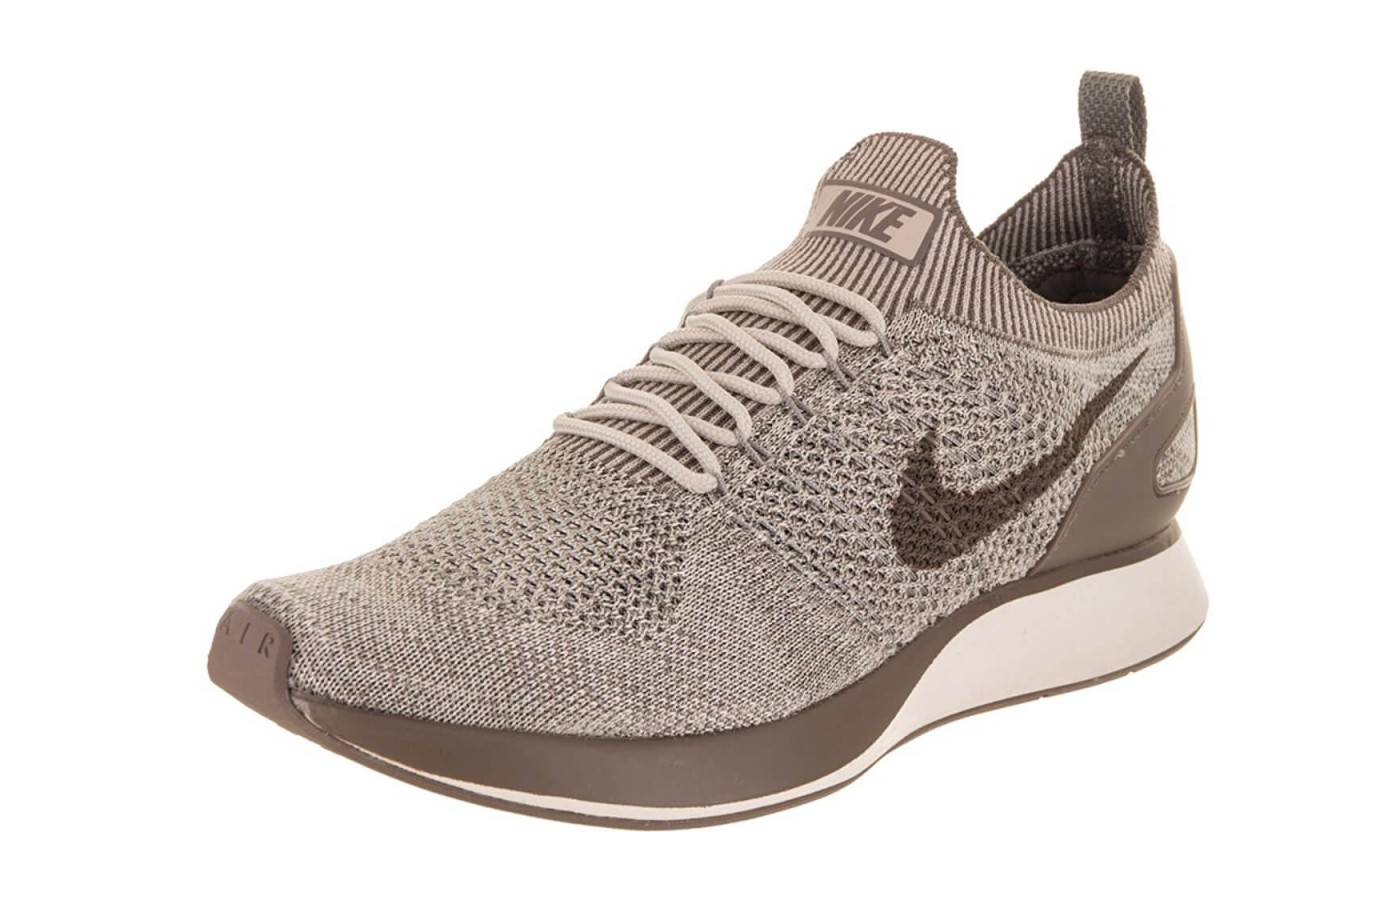 Nike Air Zoom Mariah Flyknit Racer Review - To buy or not in 2023 ...